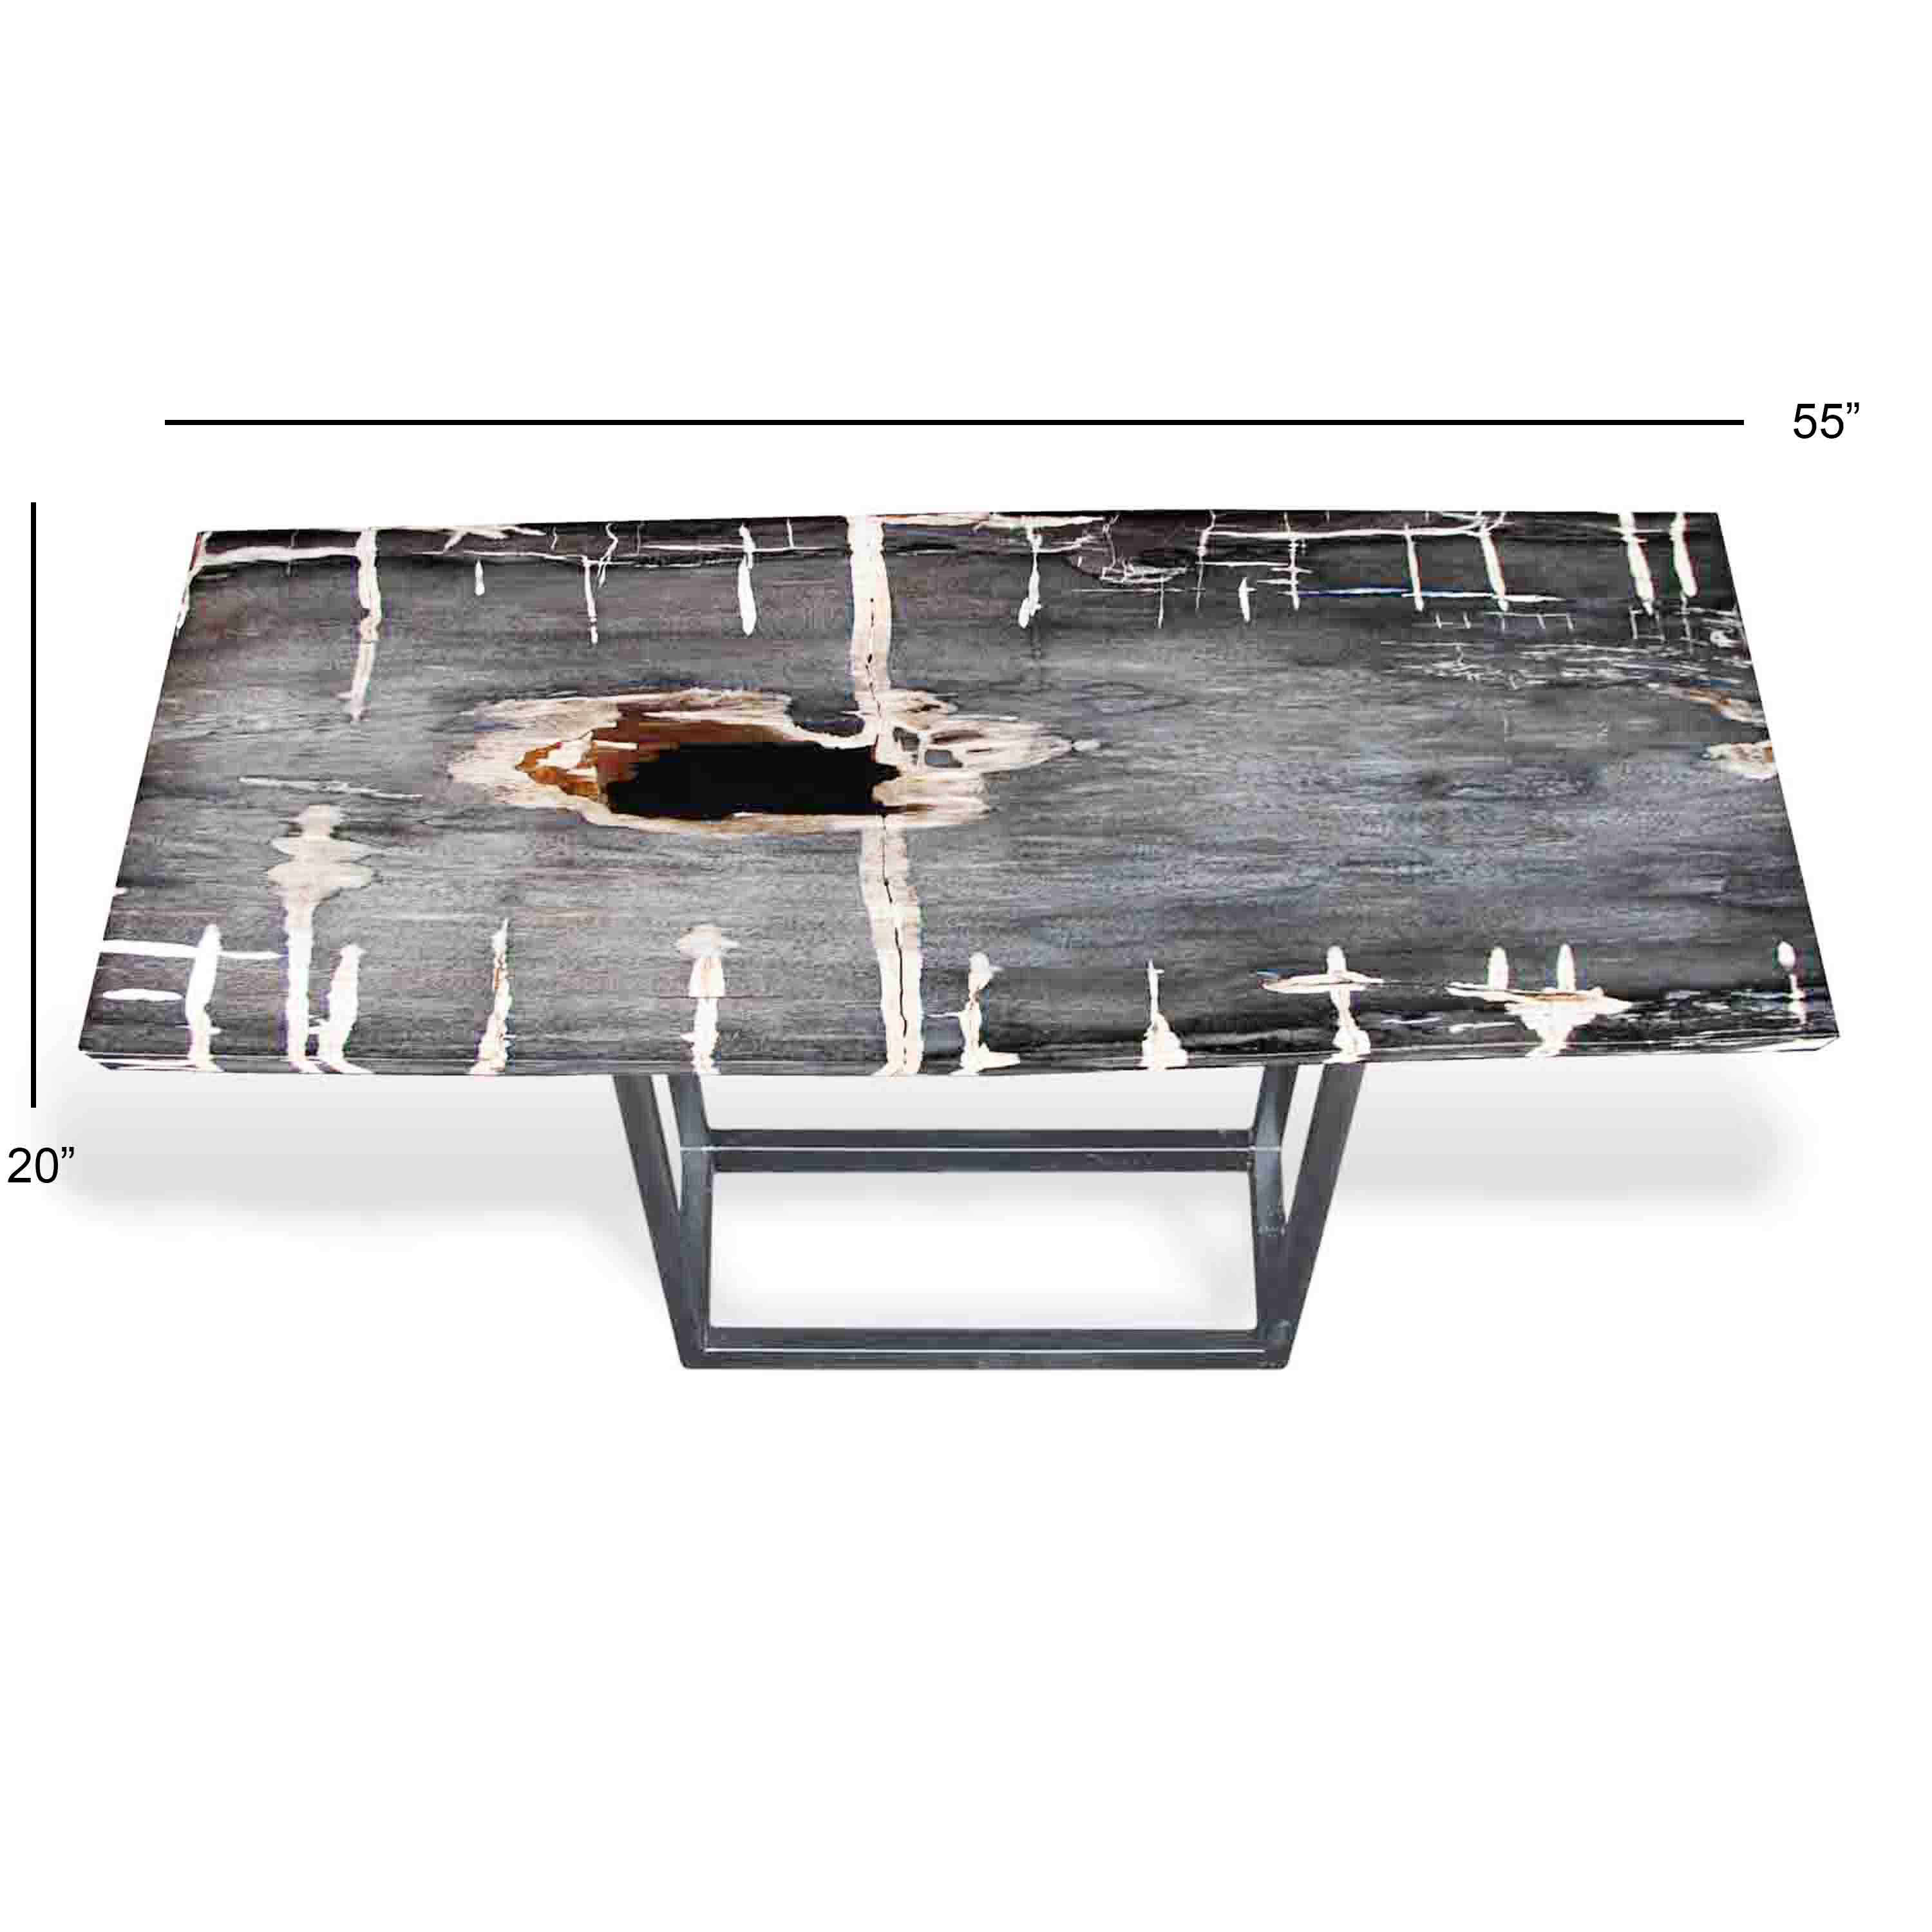 Kalifano Petrified Wood Natural Polished Petrified Wood Console Table from Indonesia - 55" / 161 lbs PWR8800.001